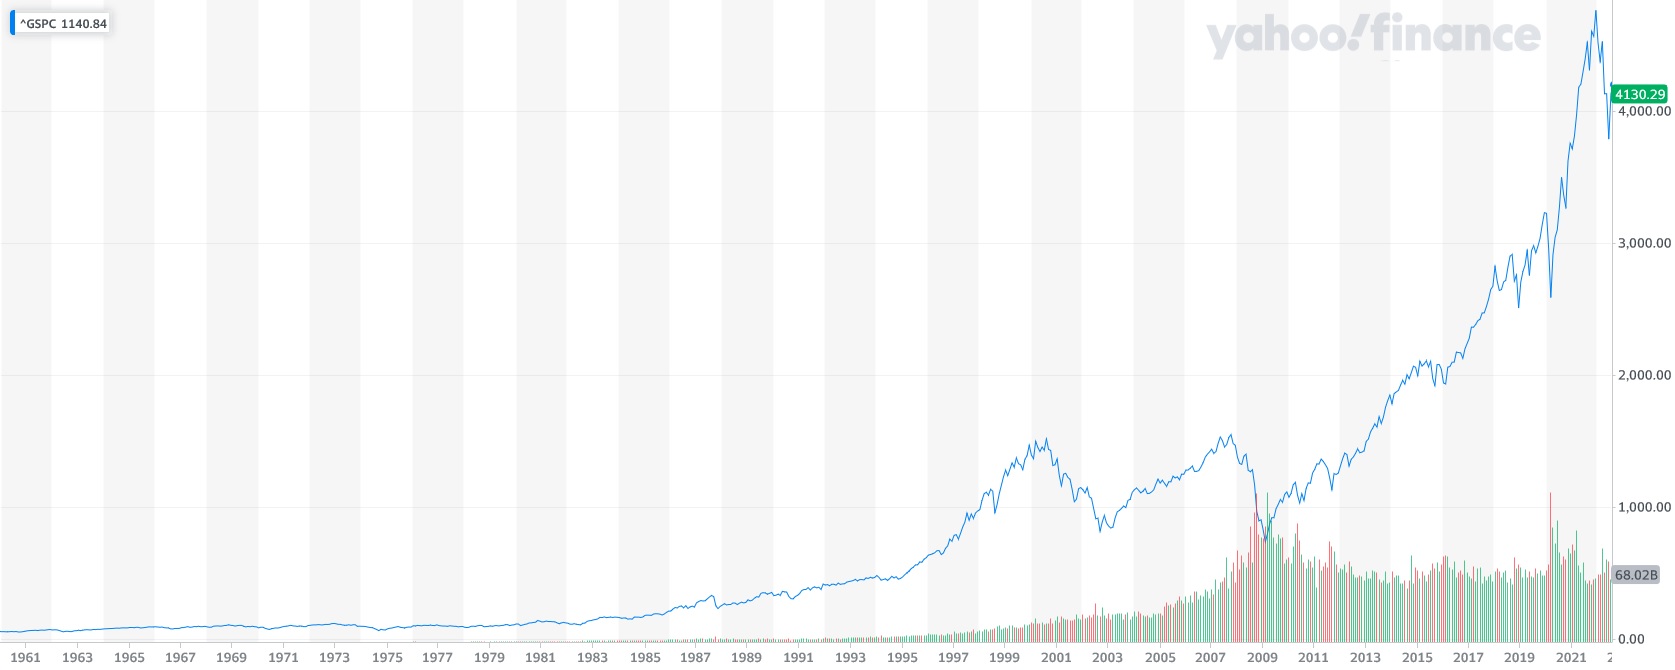 the S&P 500 Stock Universe: The S&P500 Index for the Period of January 1960 - July 2022